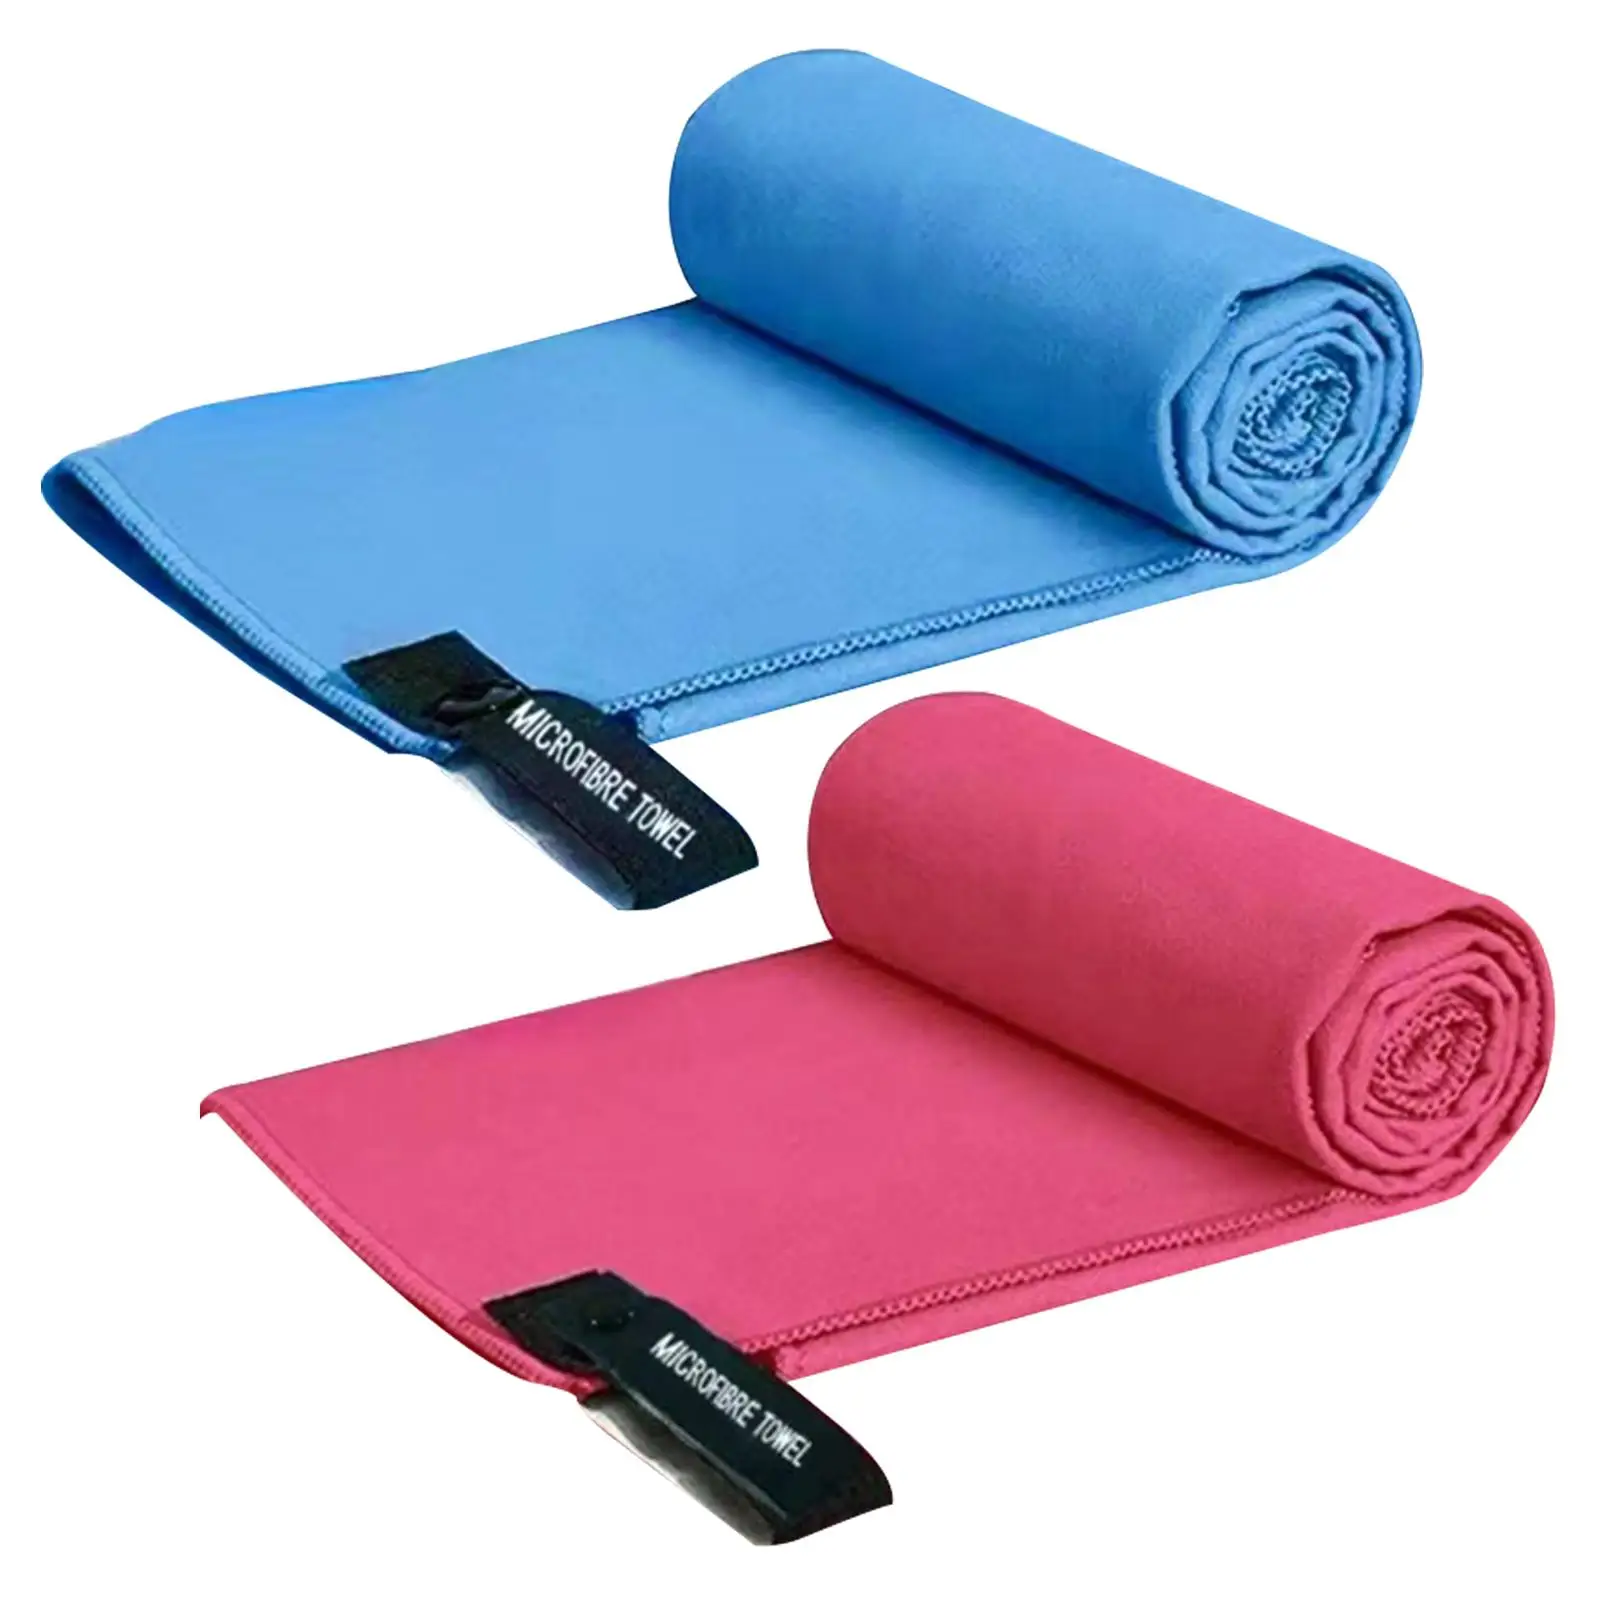 2x Travel Towel Lightweight Household Breathable Portable Soft Super Absorbent Towel for Camp Hand Face Body Swimming Gym